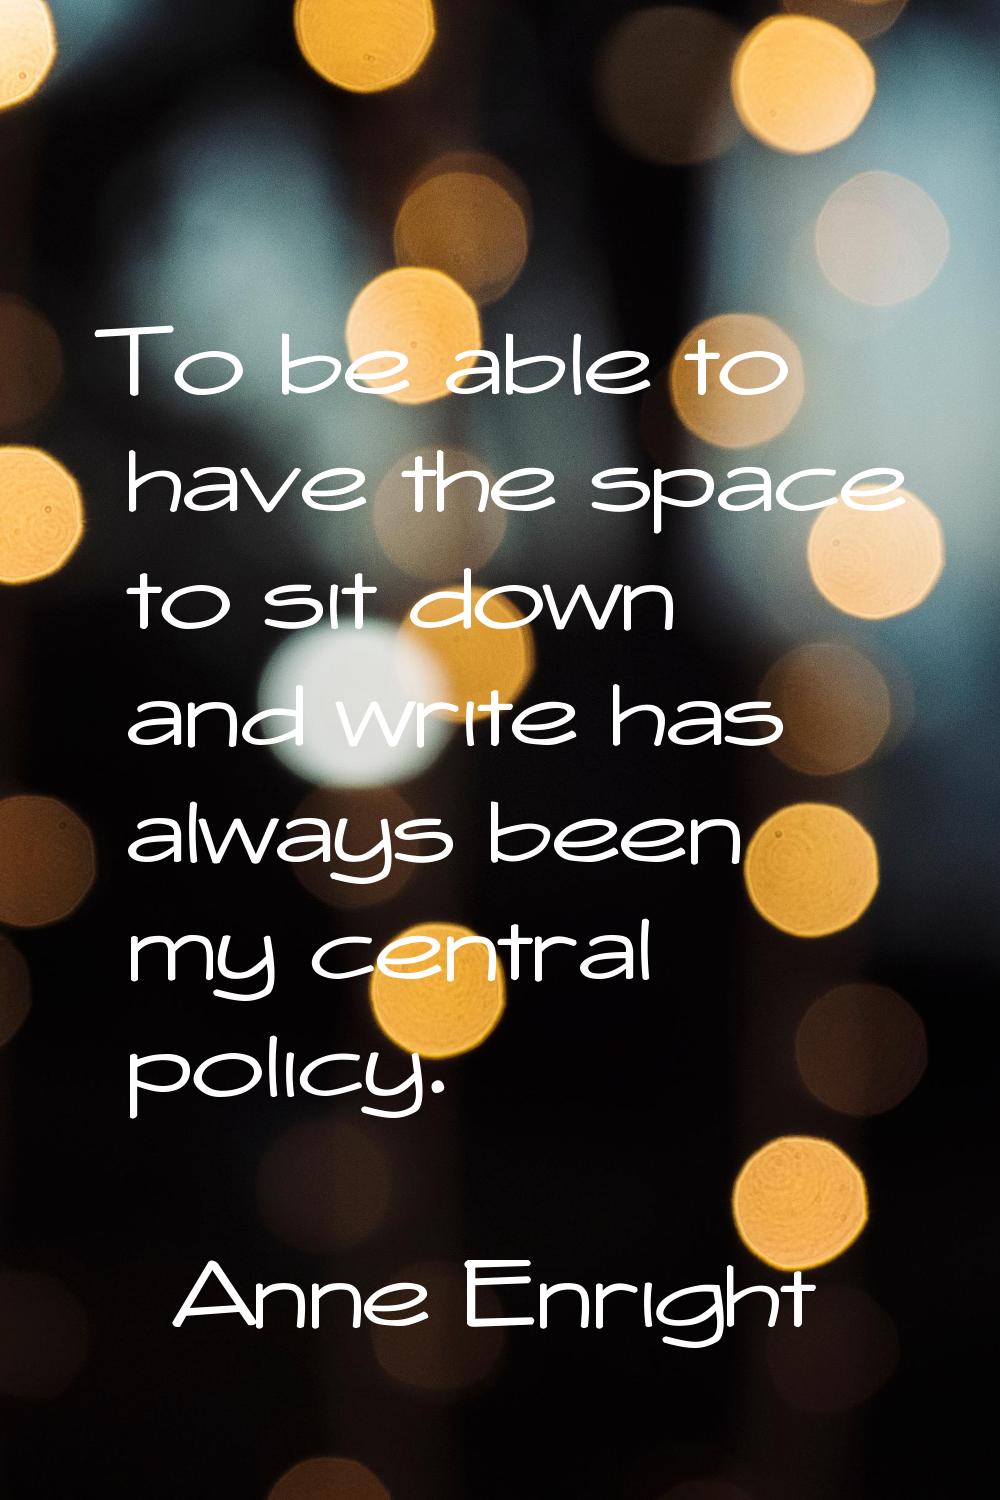 To be able to have the space to sit down and write has always been my central policy.